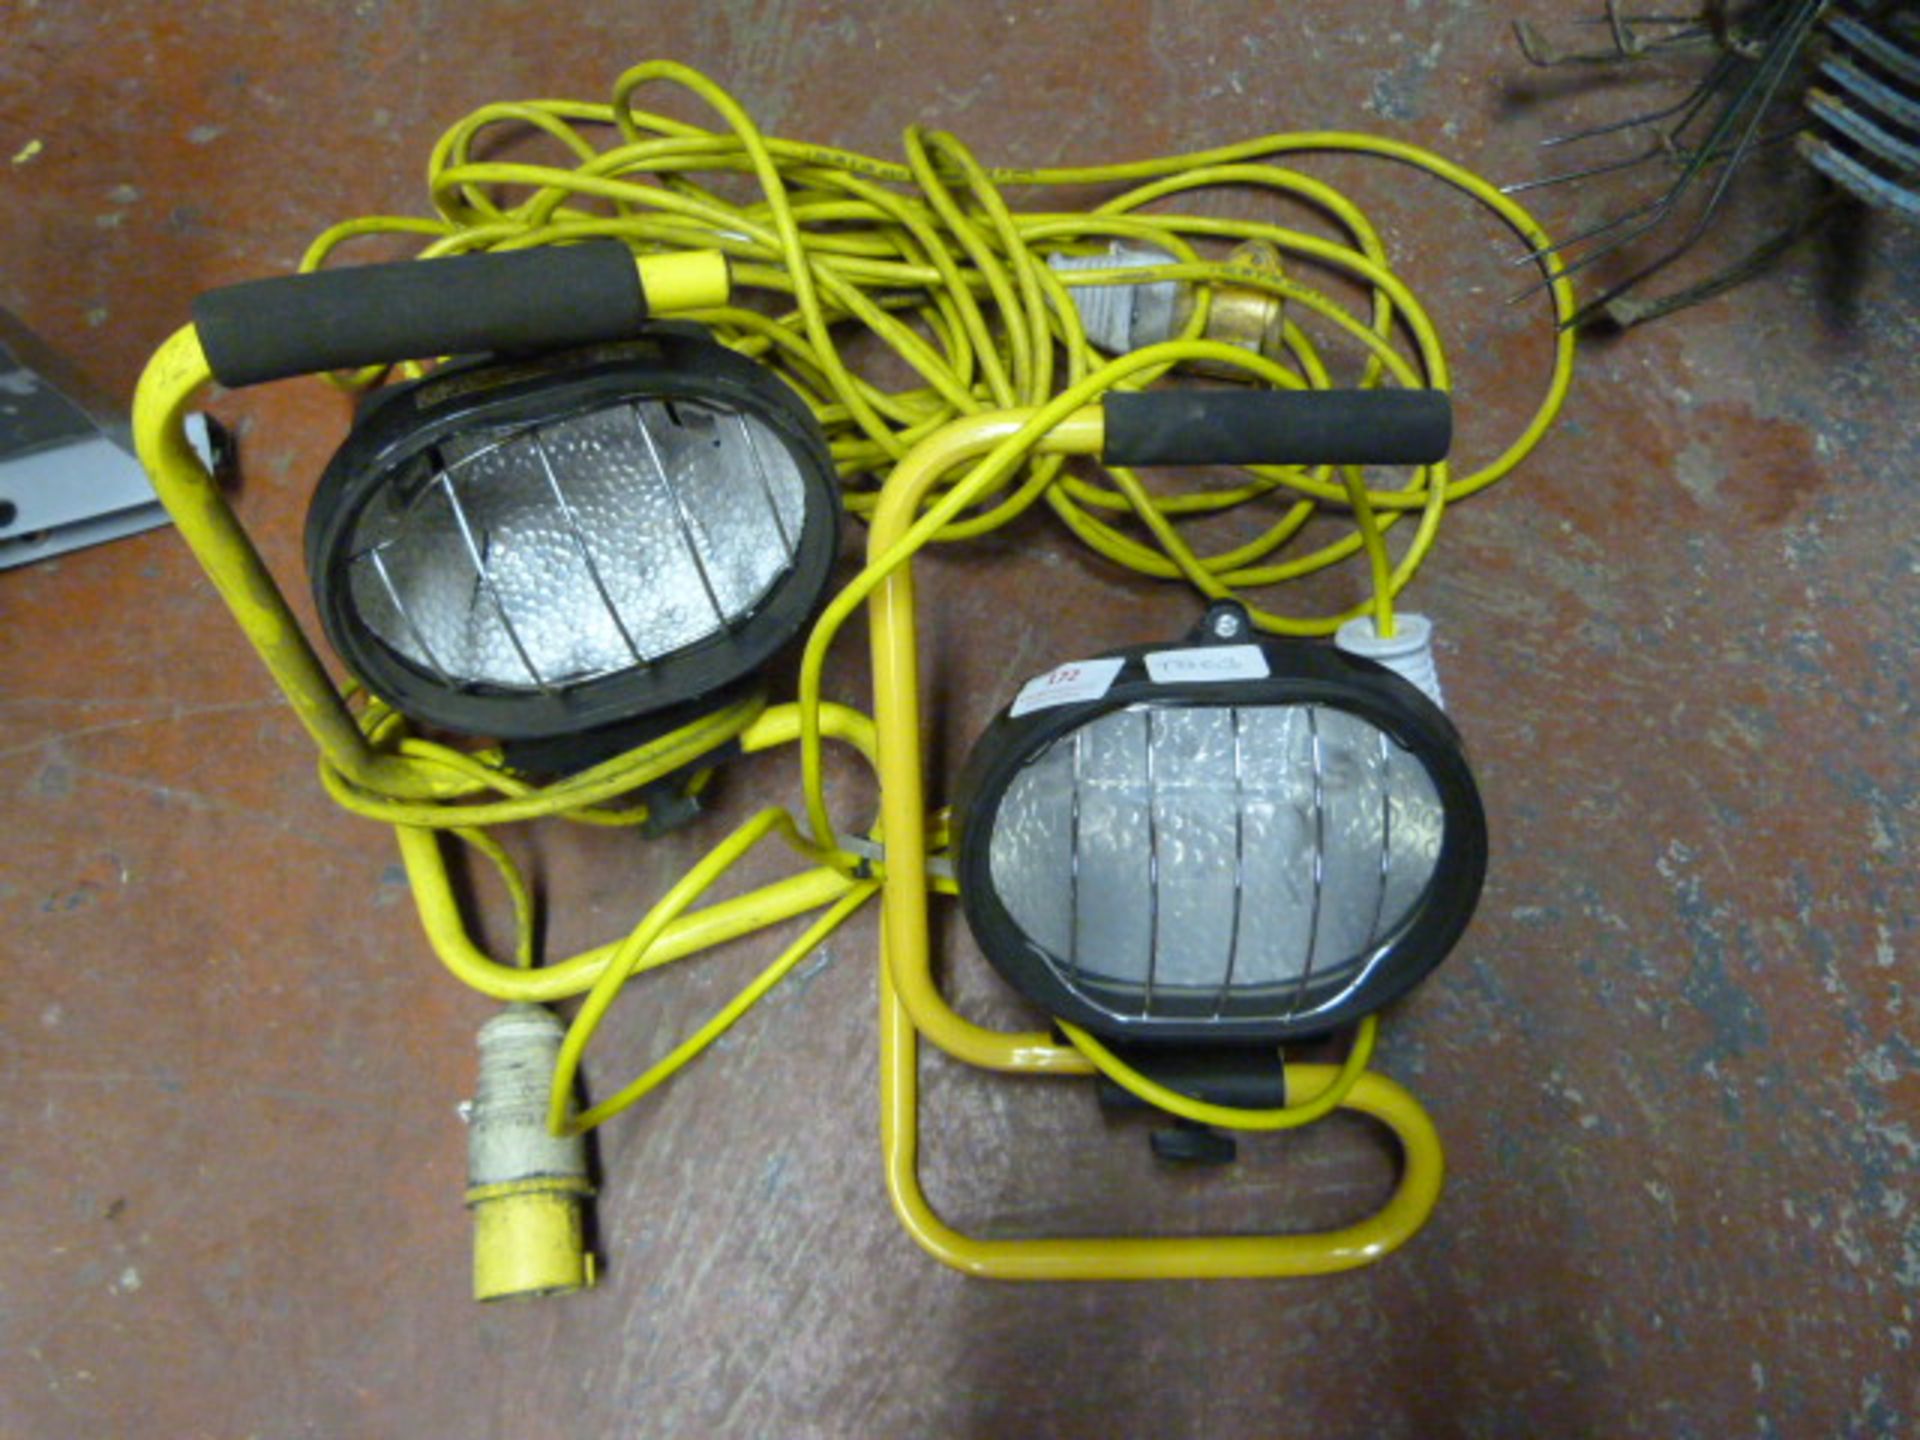 *Two Site Lamps and an Extension Lead